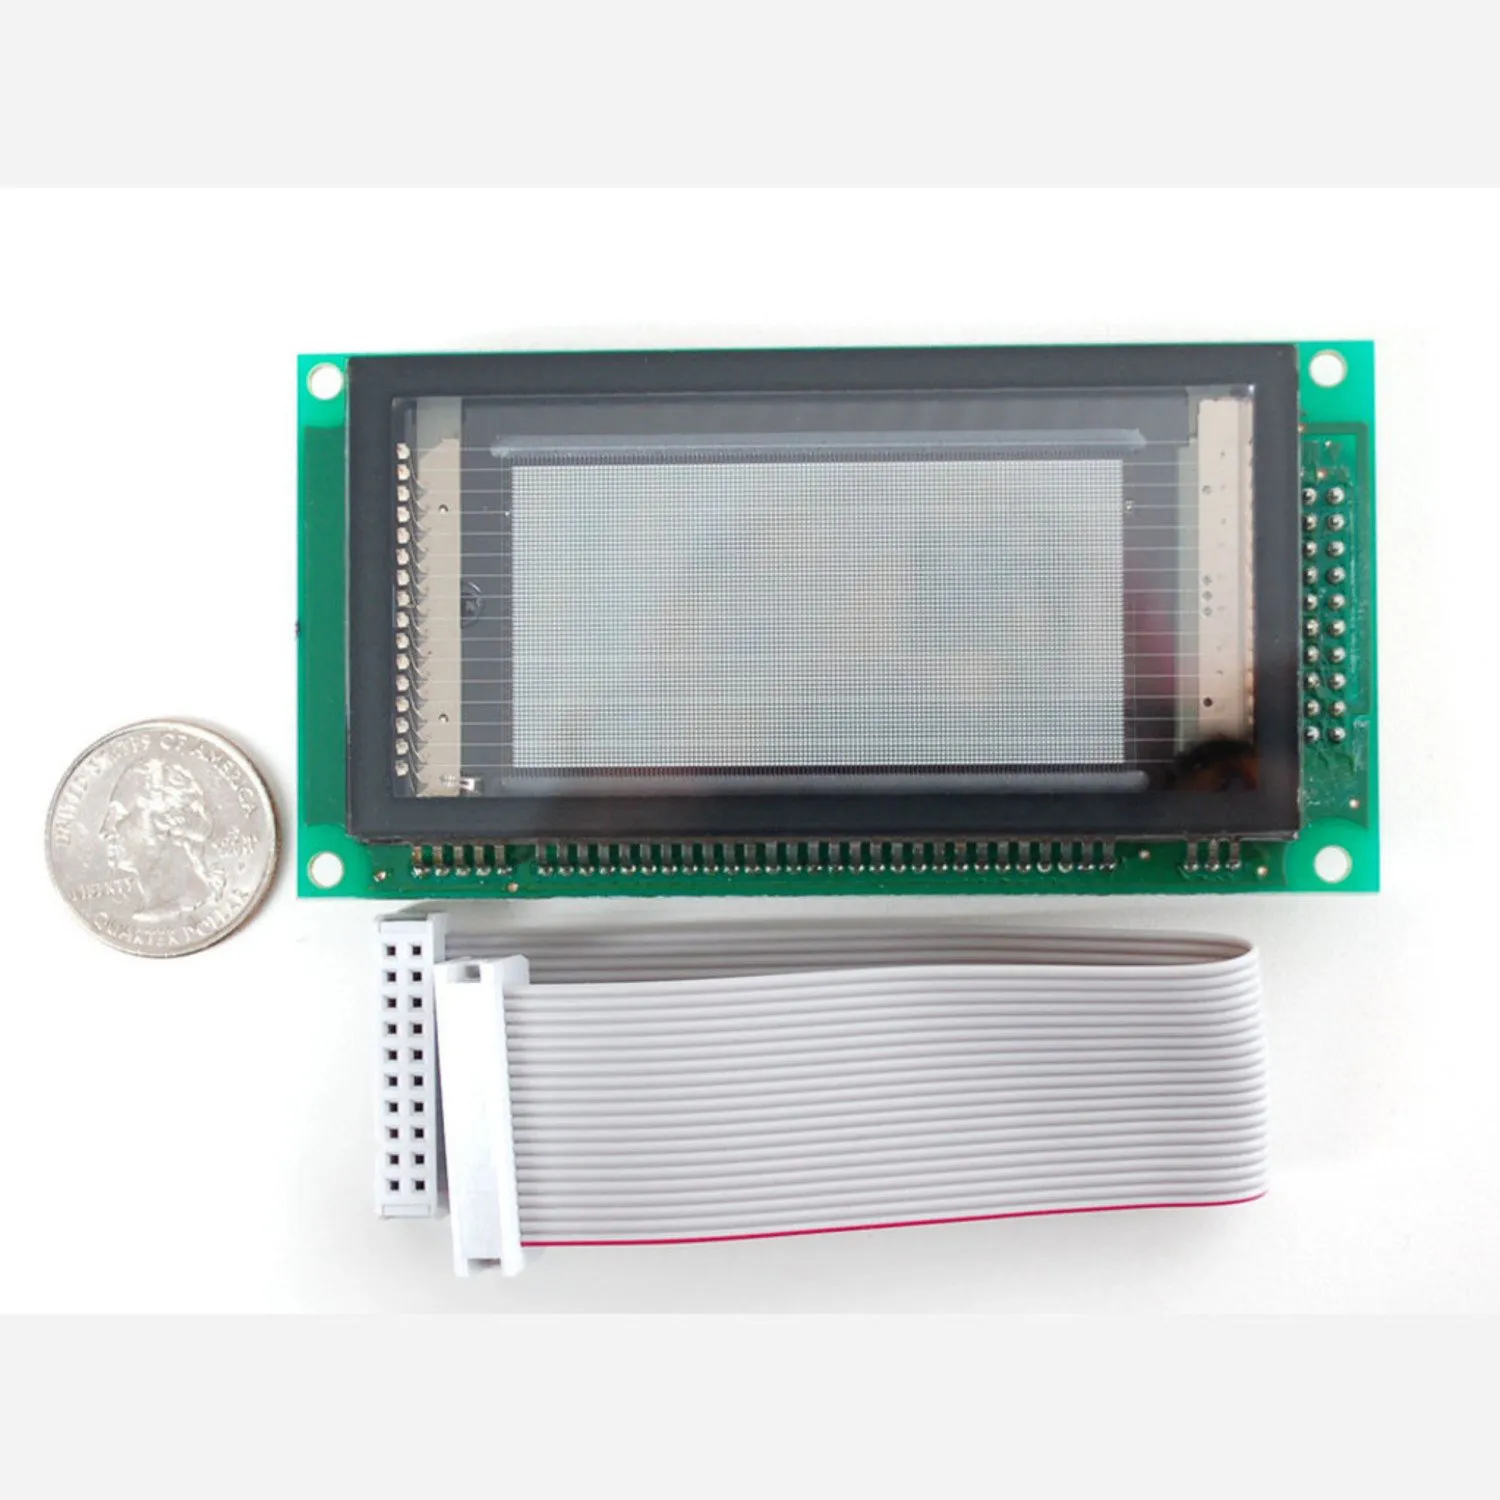 Photo of 128x64 Graphic VFD (Vacuum Fluorescent Display) - SPI interface